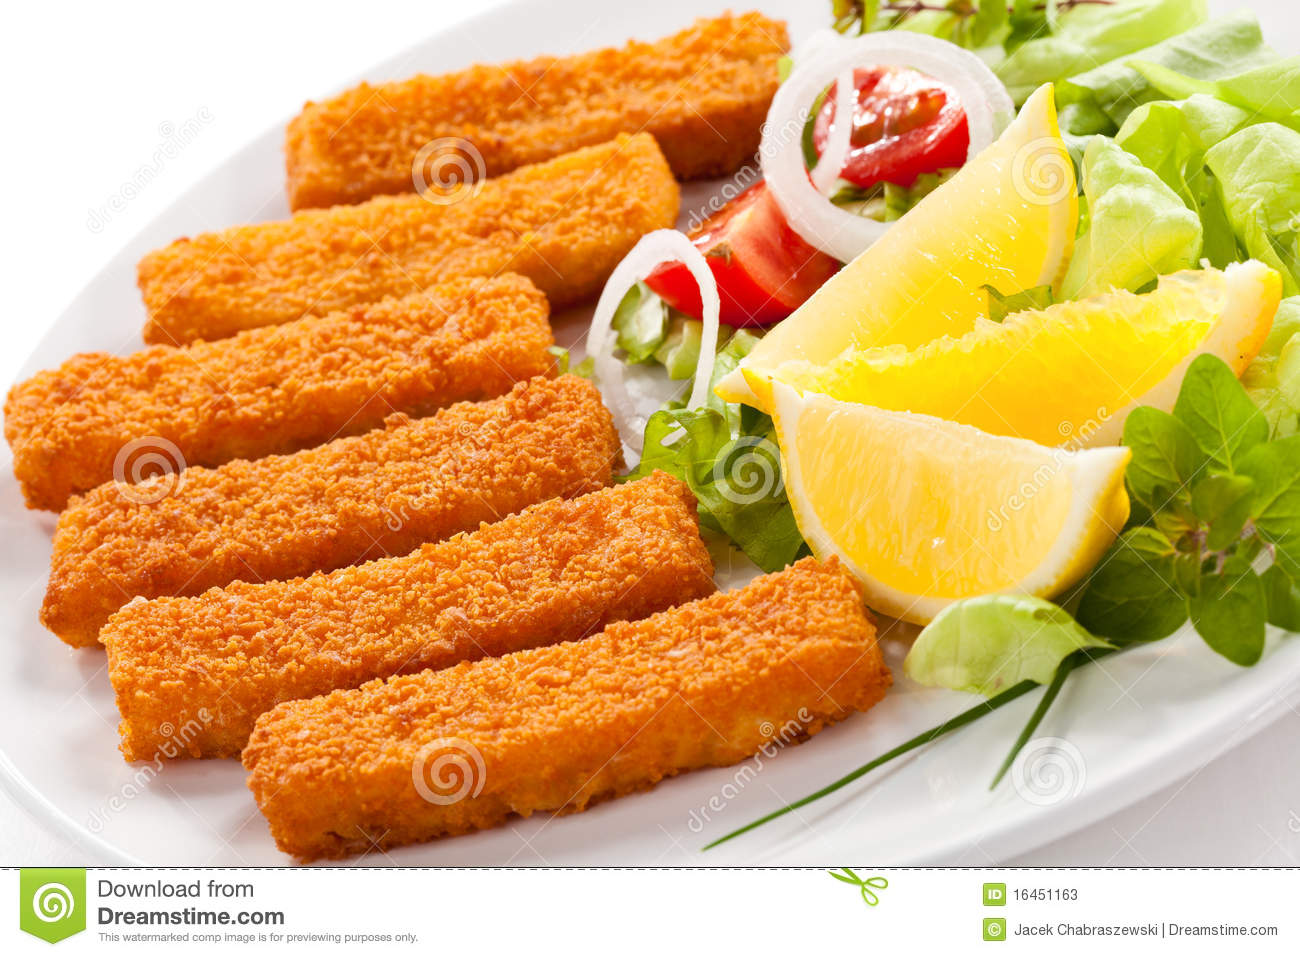 Fried Fish Fingers Stock Photos   Image  16451163